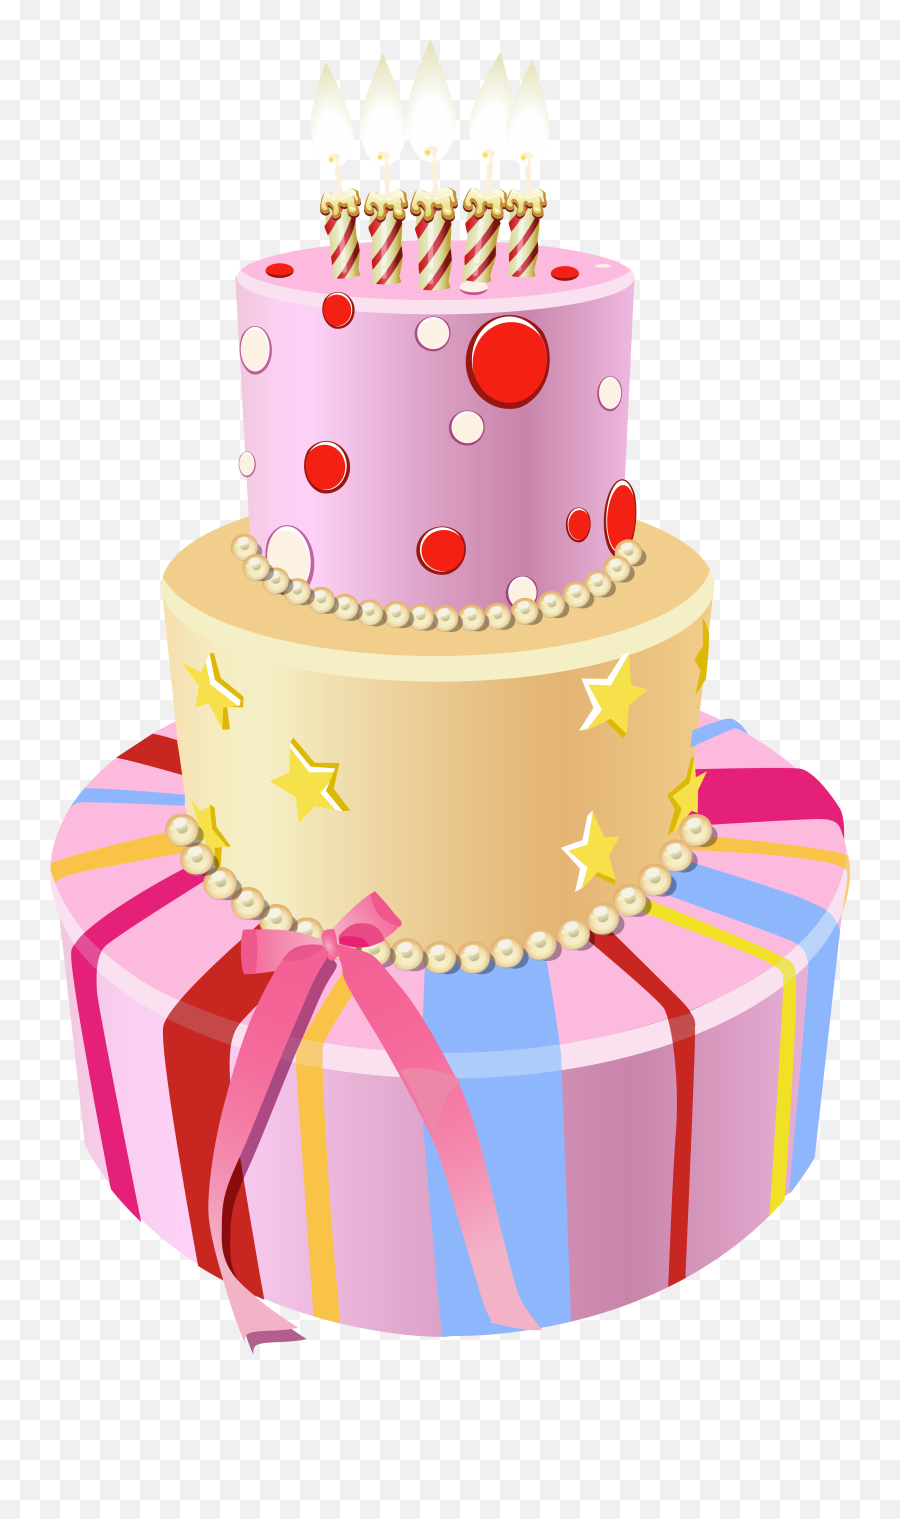 Birthday Cake Transparent Png Clipart - Clip Art Tbirthday Cakes Emoji,Who Makes Emoji Cakes